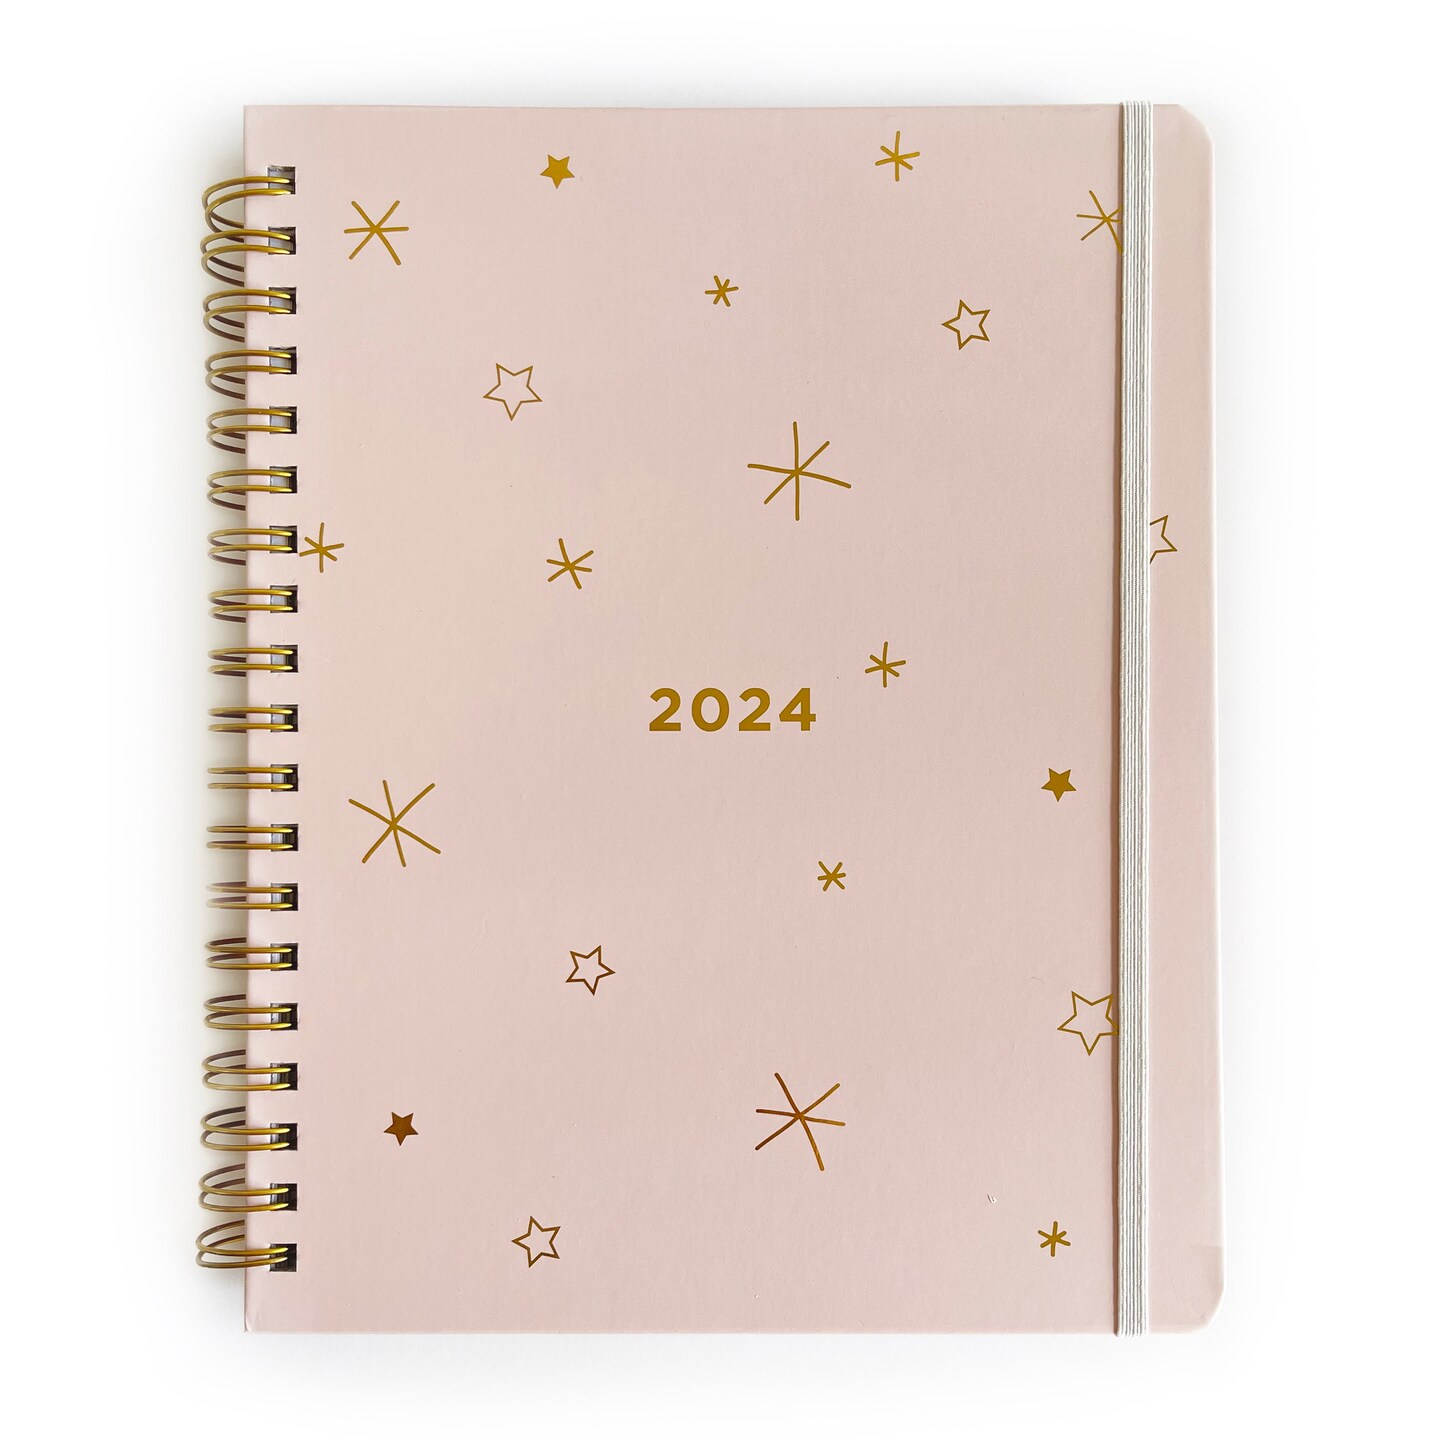 2024 reverie planner blush sparkles 12 month weekly planner by lake